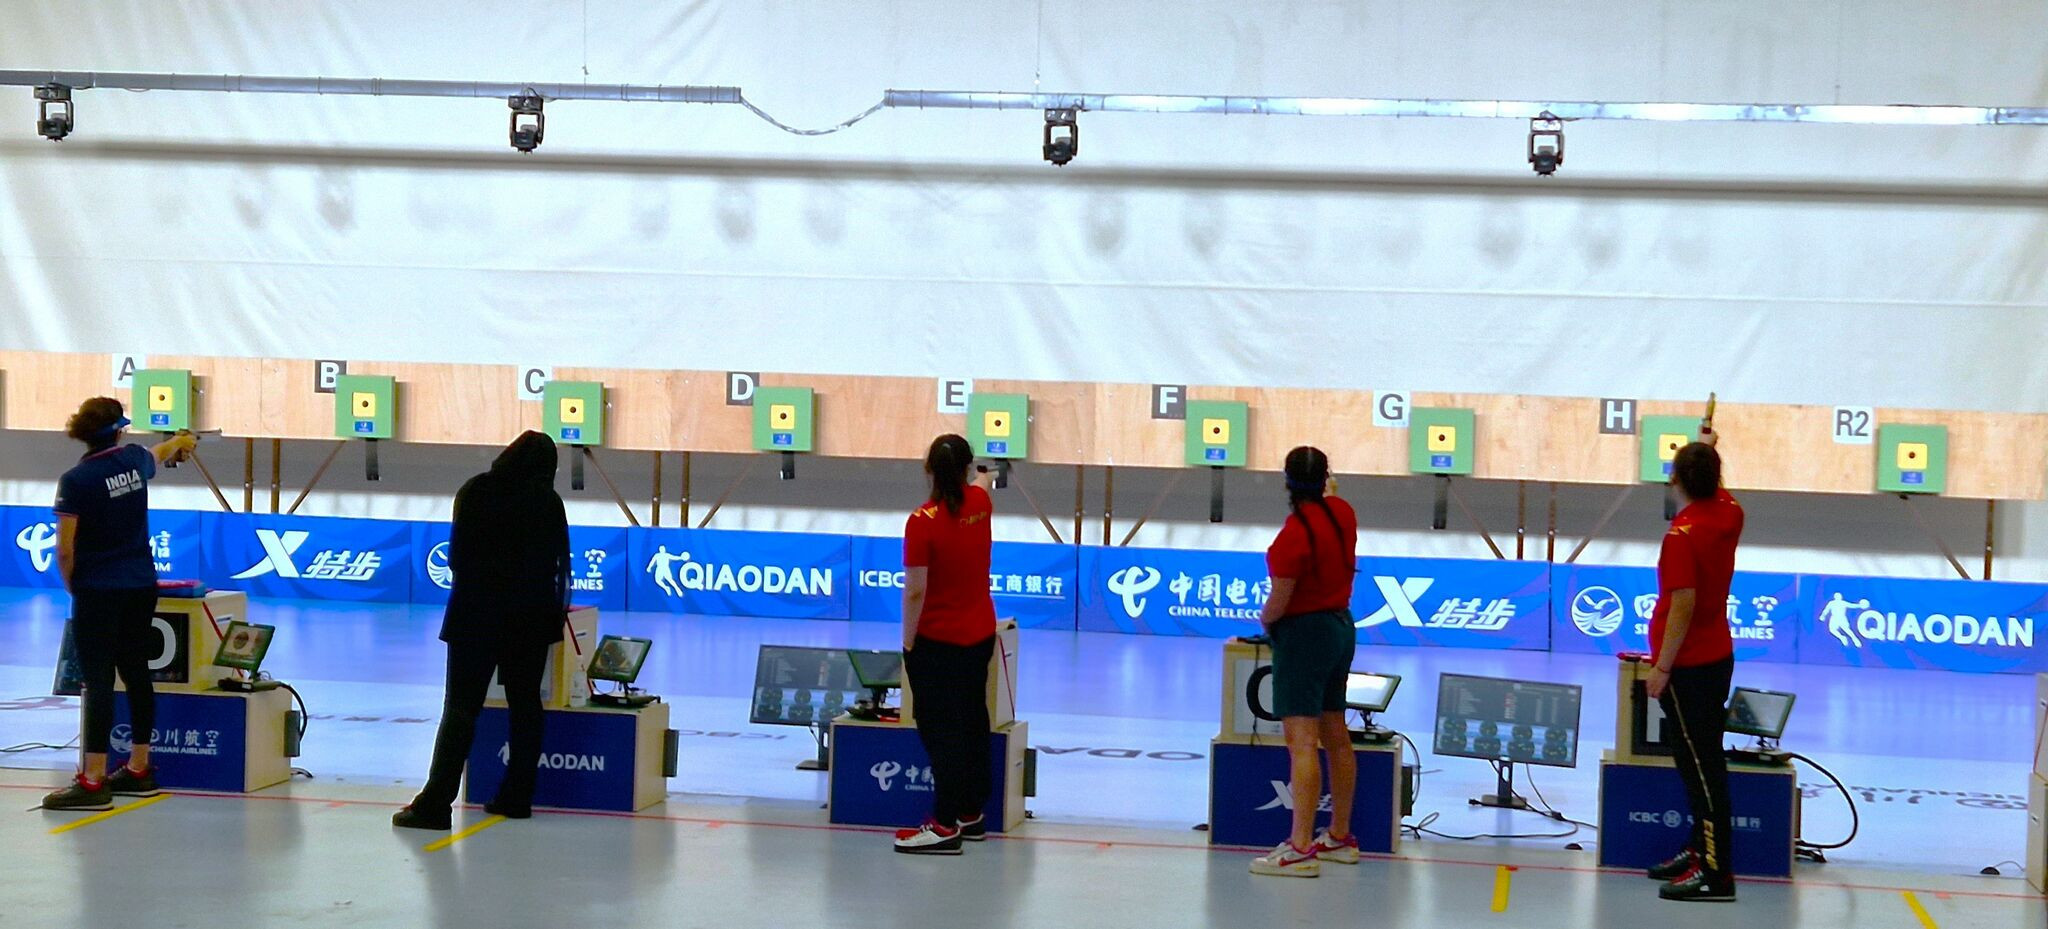 India won three of the four shooting golds on offer on day one of the Chengdu 2021 Summer World University Games ©Chengdu 2021